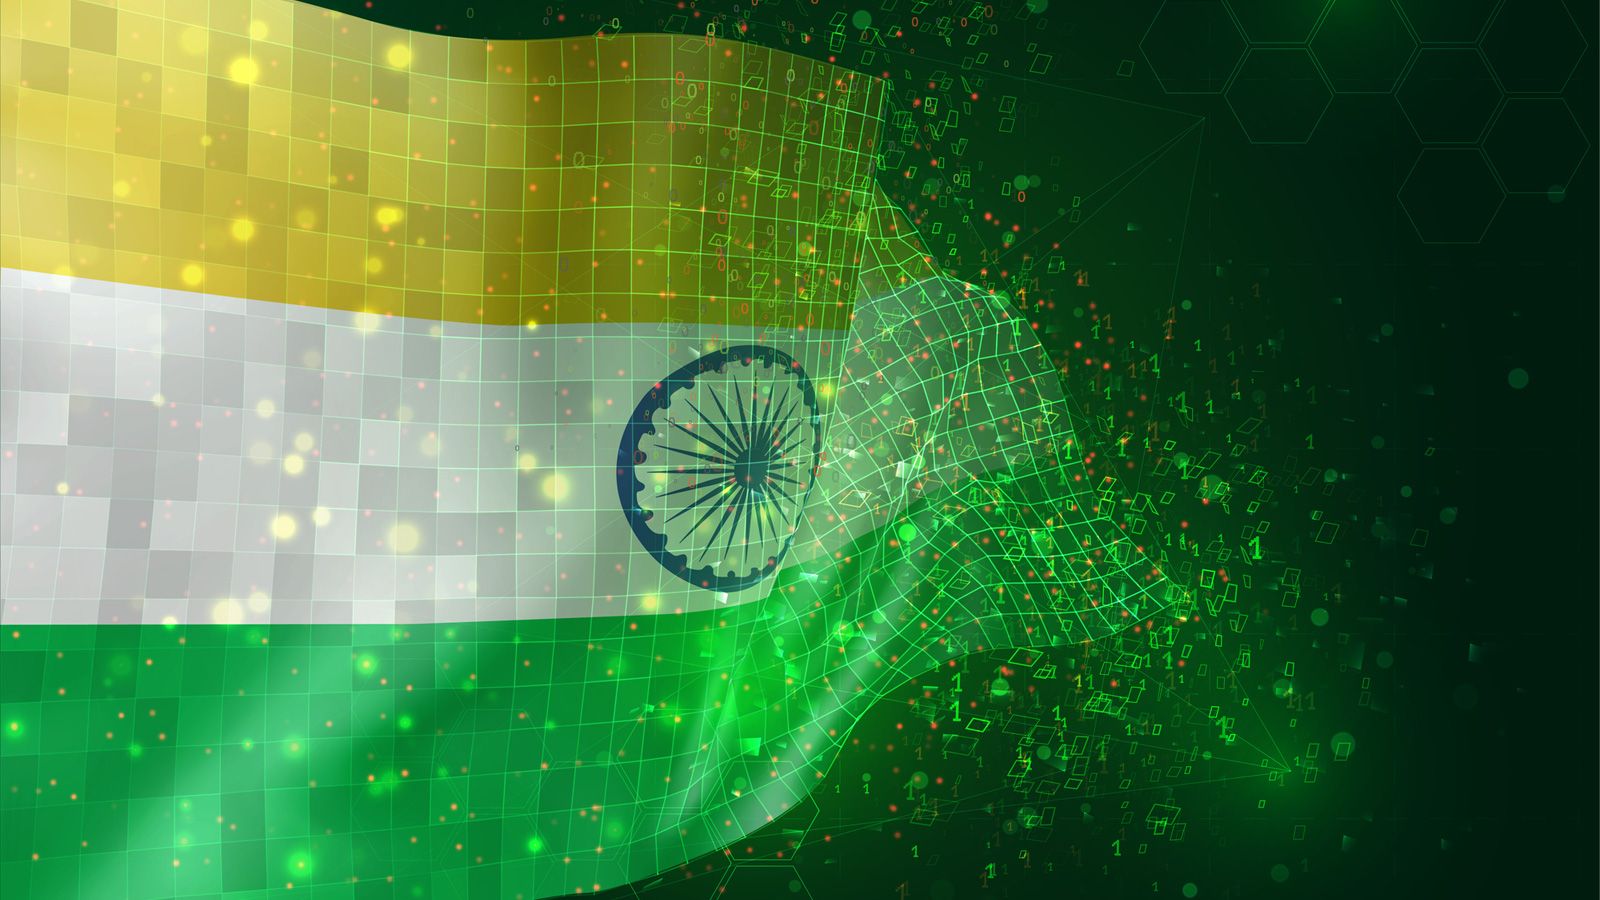 Smishing Triad Is Targeting India To Steal Personal and Payment Data at Scale